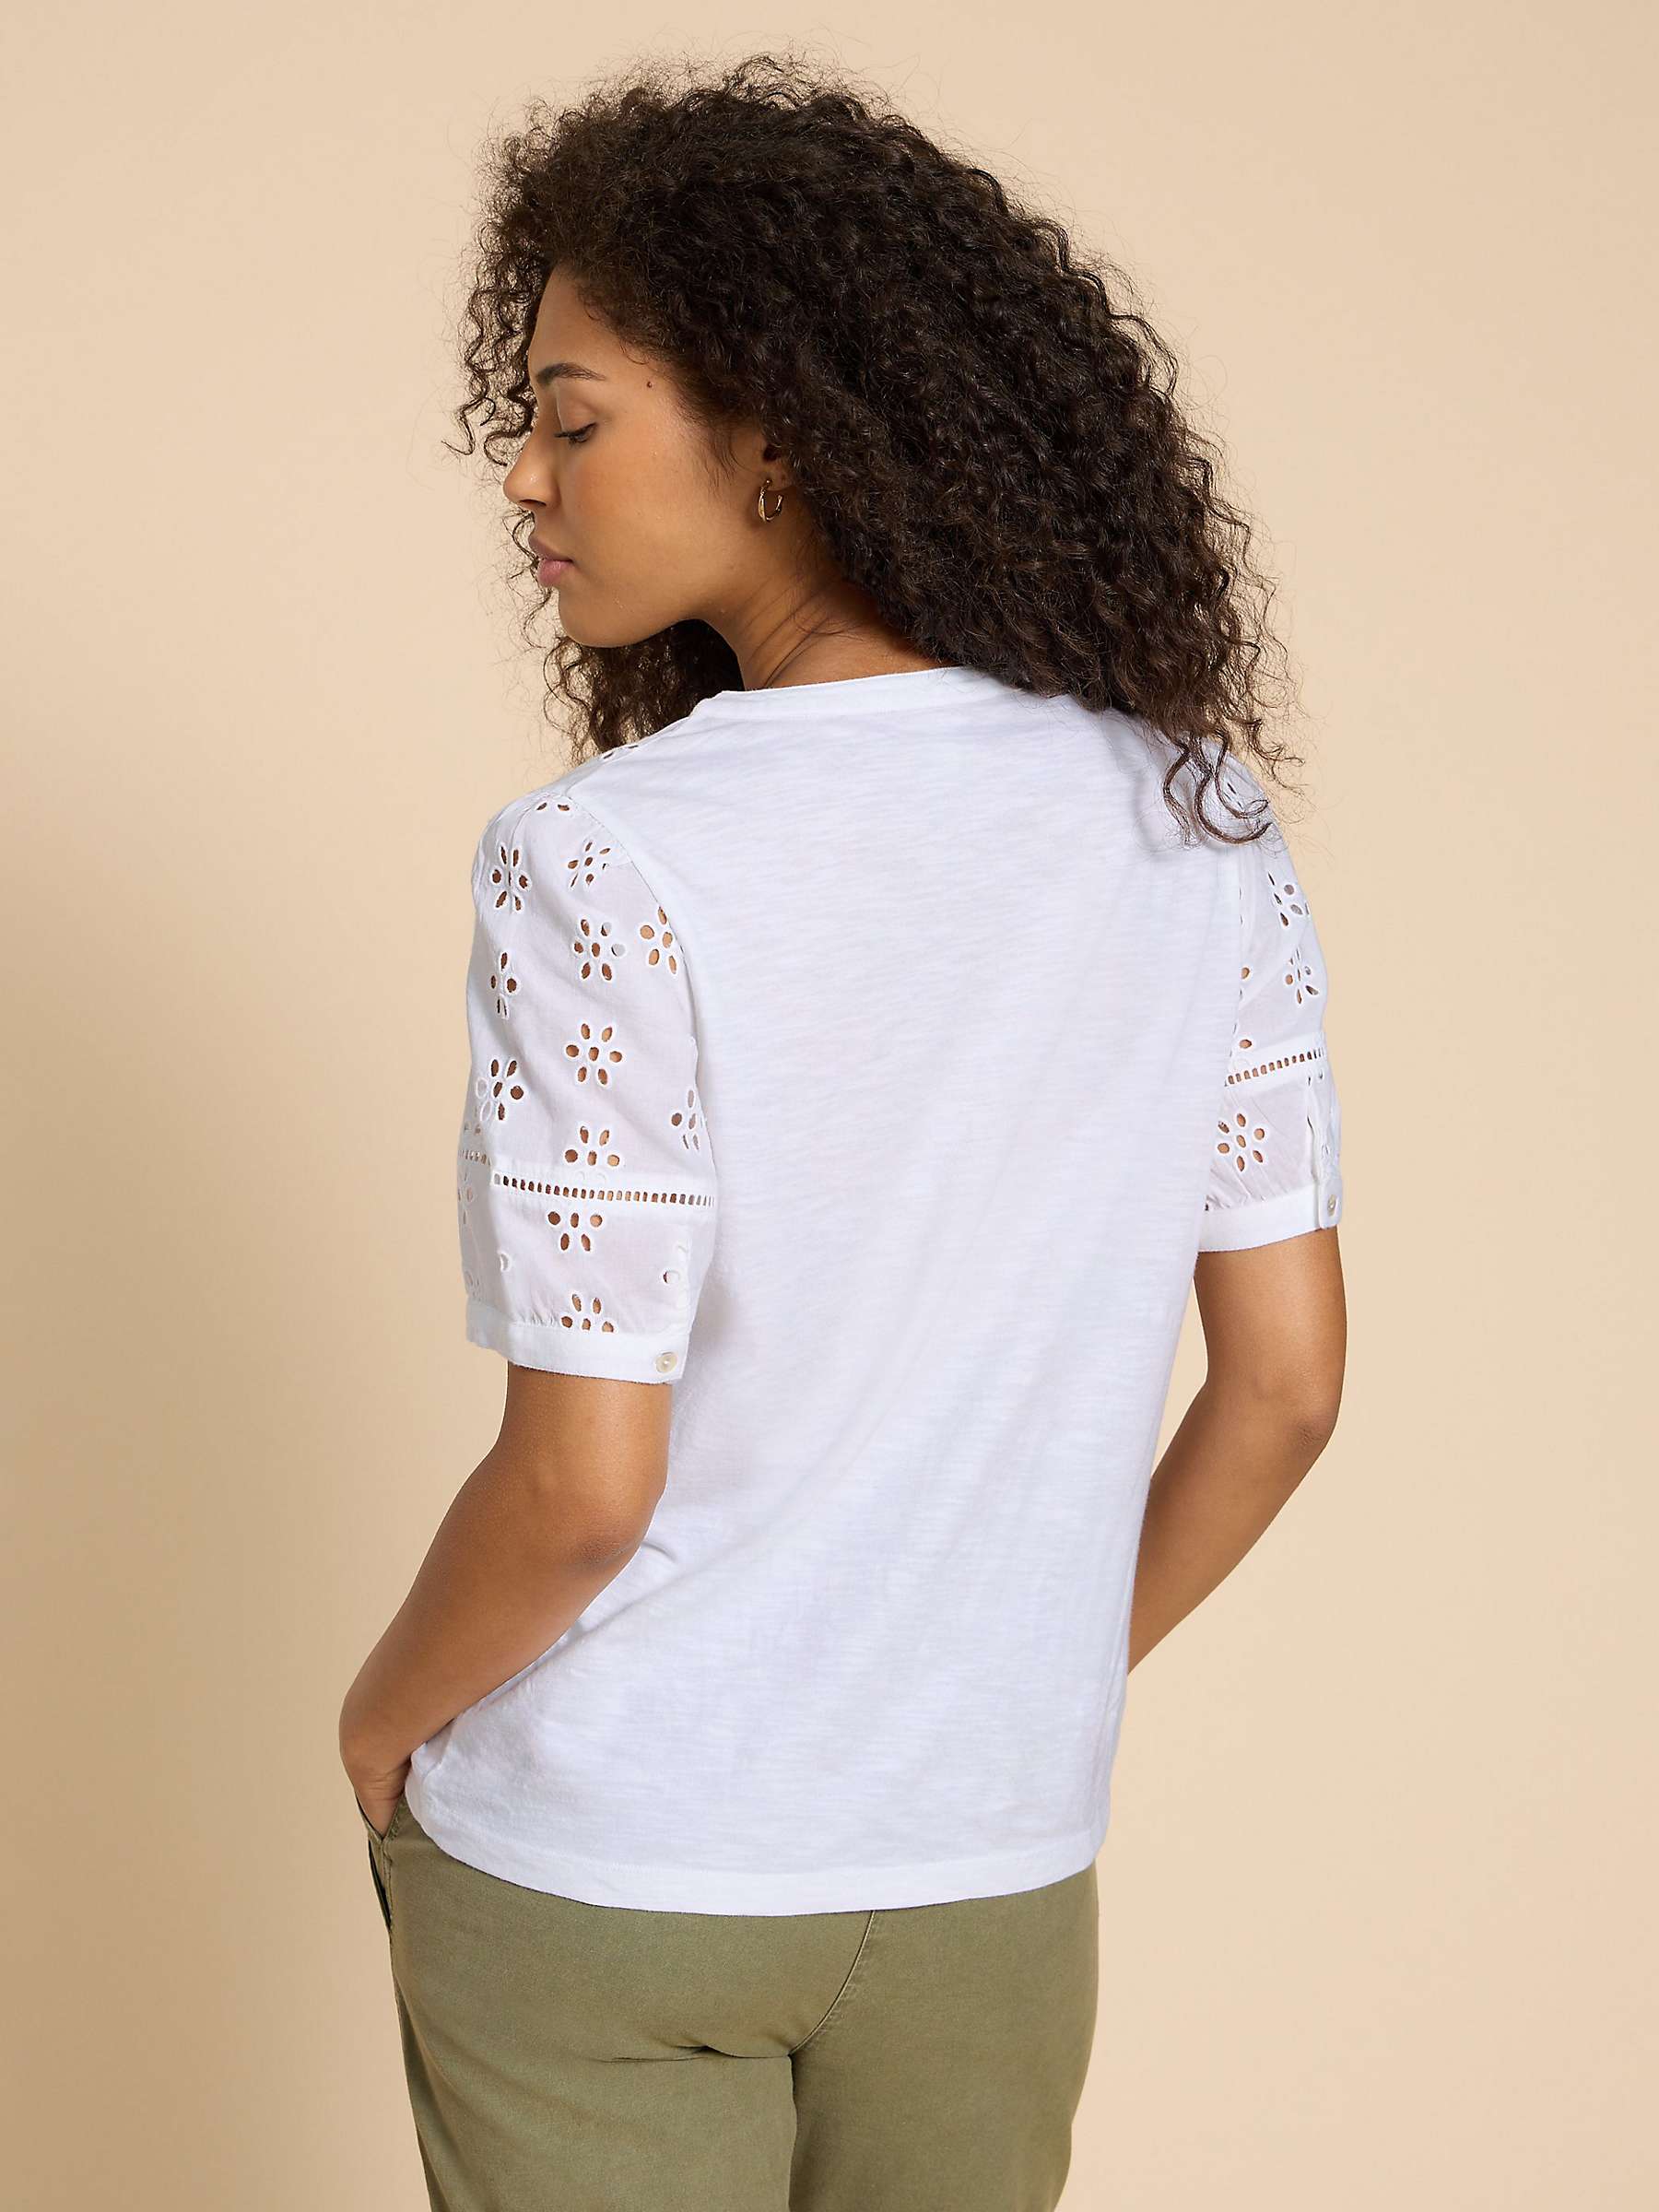 Buy White Stuff Broderie Anglaise Cotton Top, Brilliant White Online at johnlewis.com